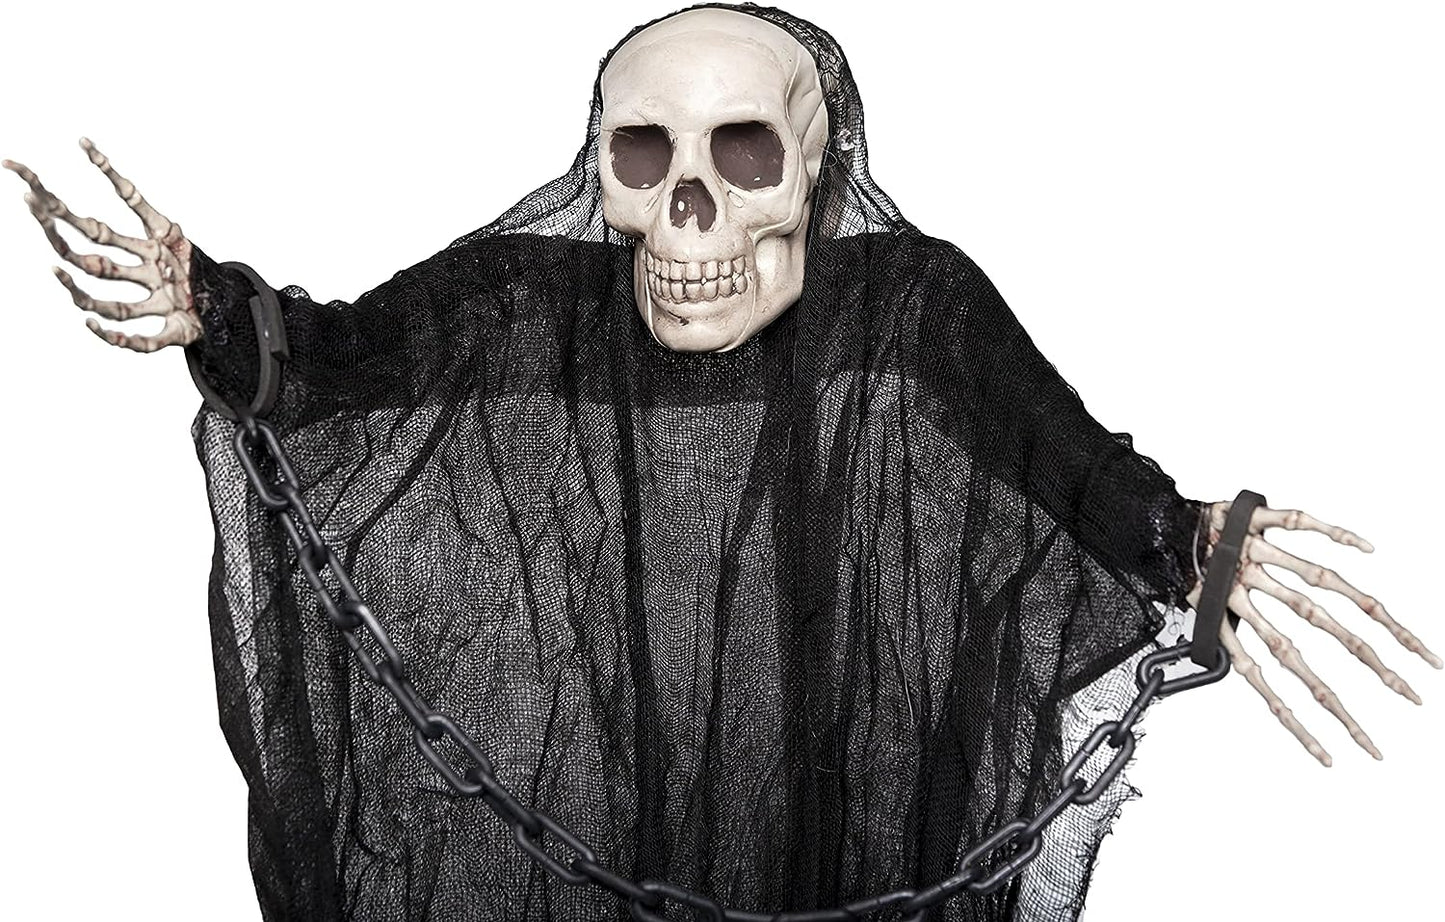 Hanging Ghost Skeleton Halloween Decor 90cm Chain Spooky Prop with Chained Arms